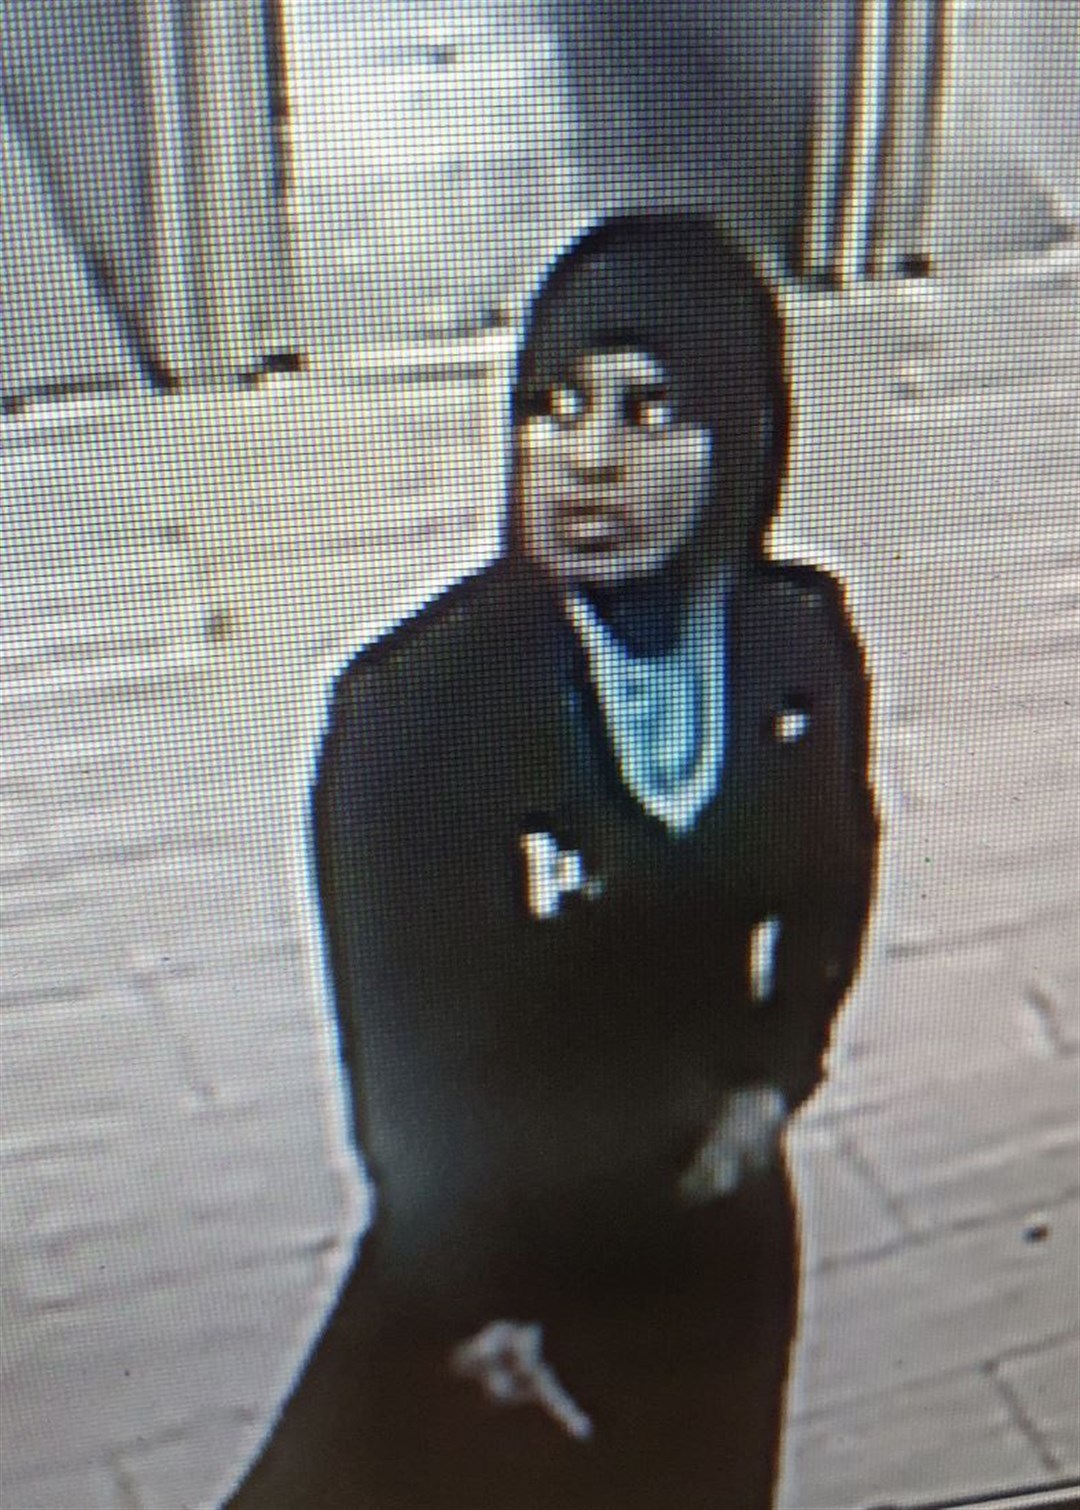 Fatuma Kadir went missing from her home in Bolton (Greater Manchester Police/PA)